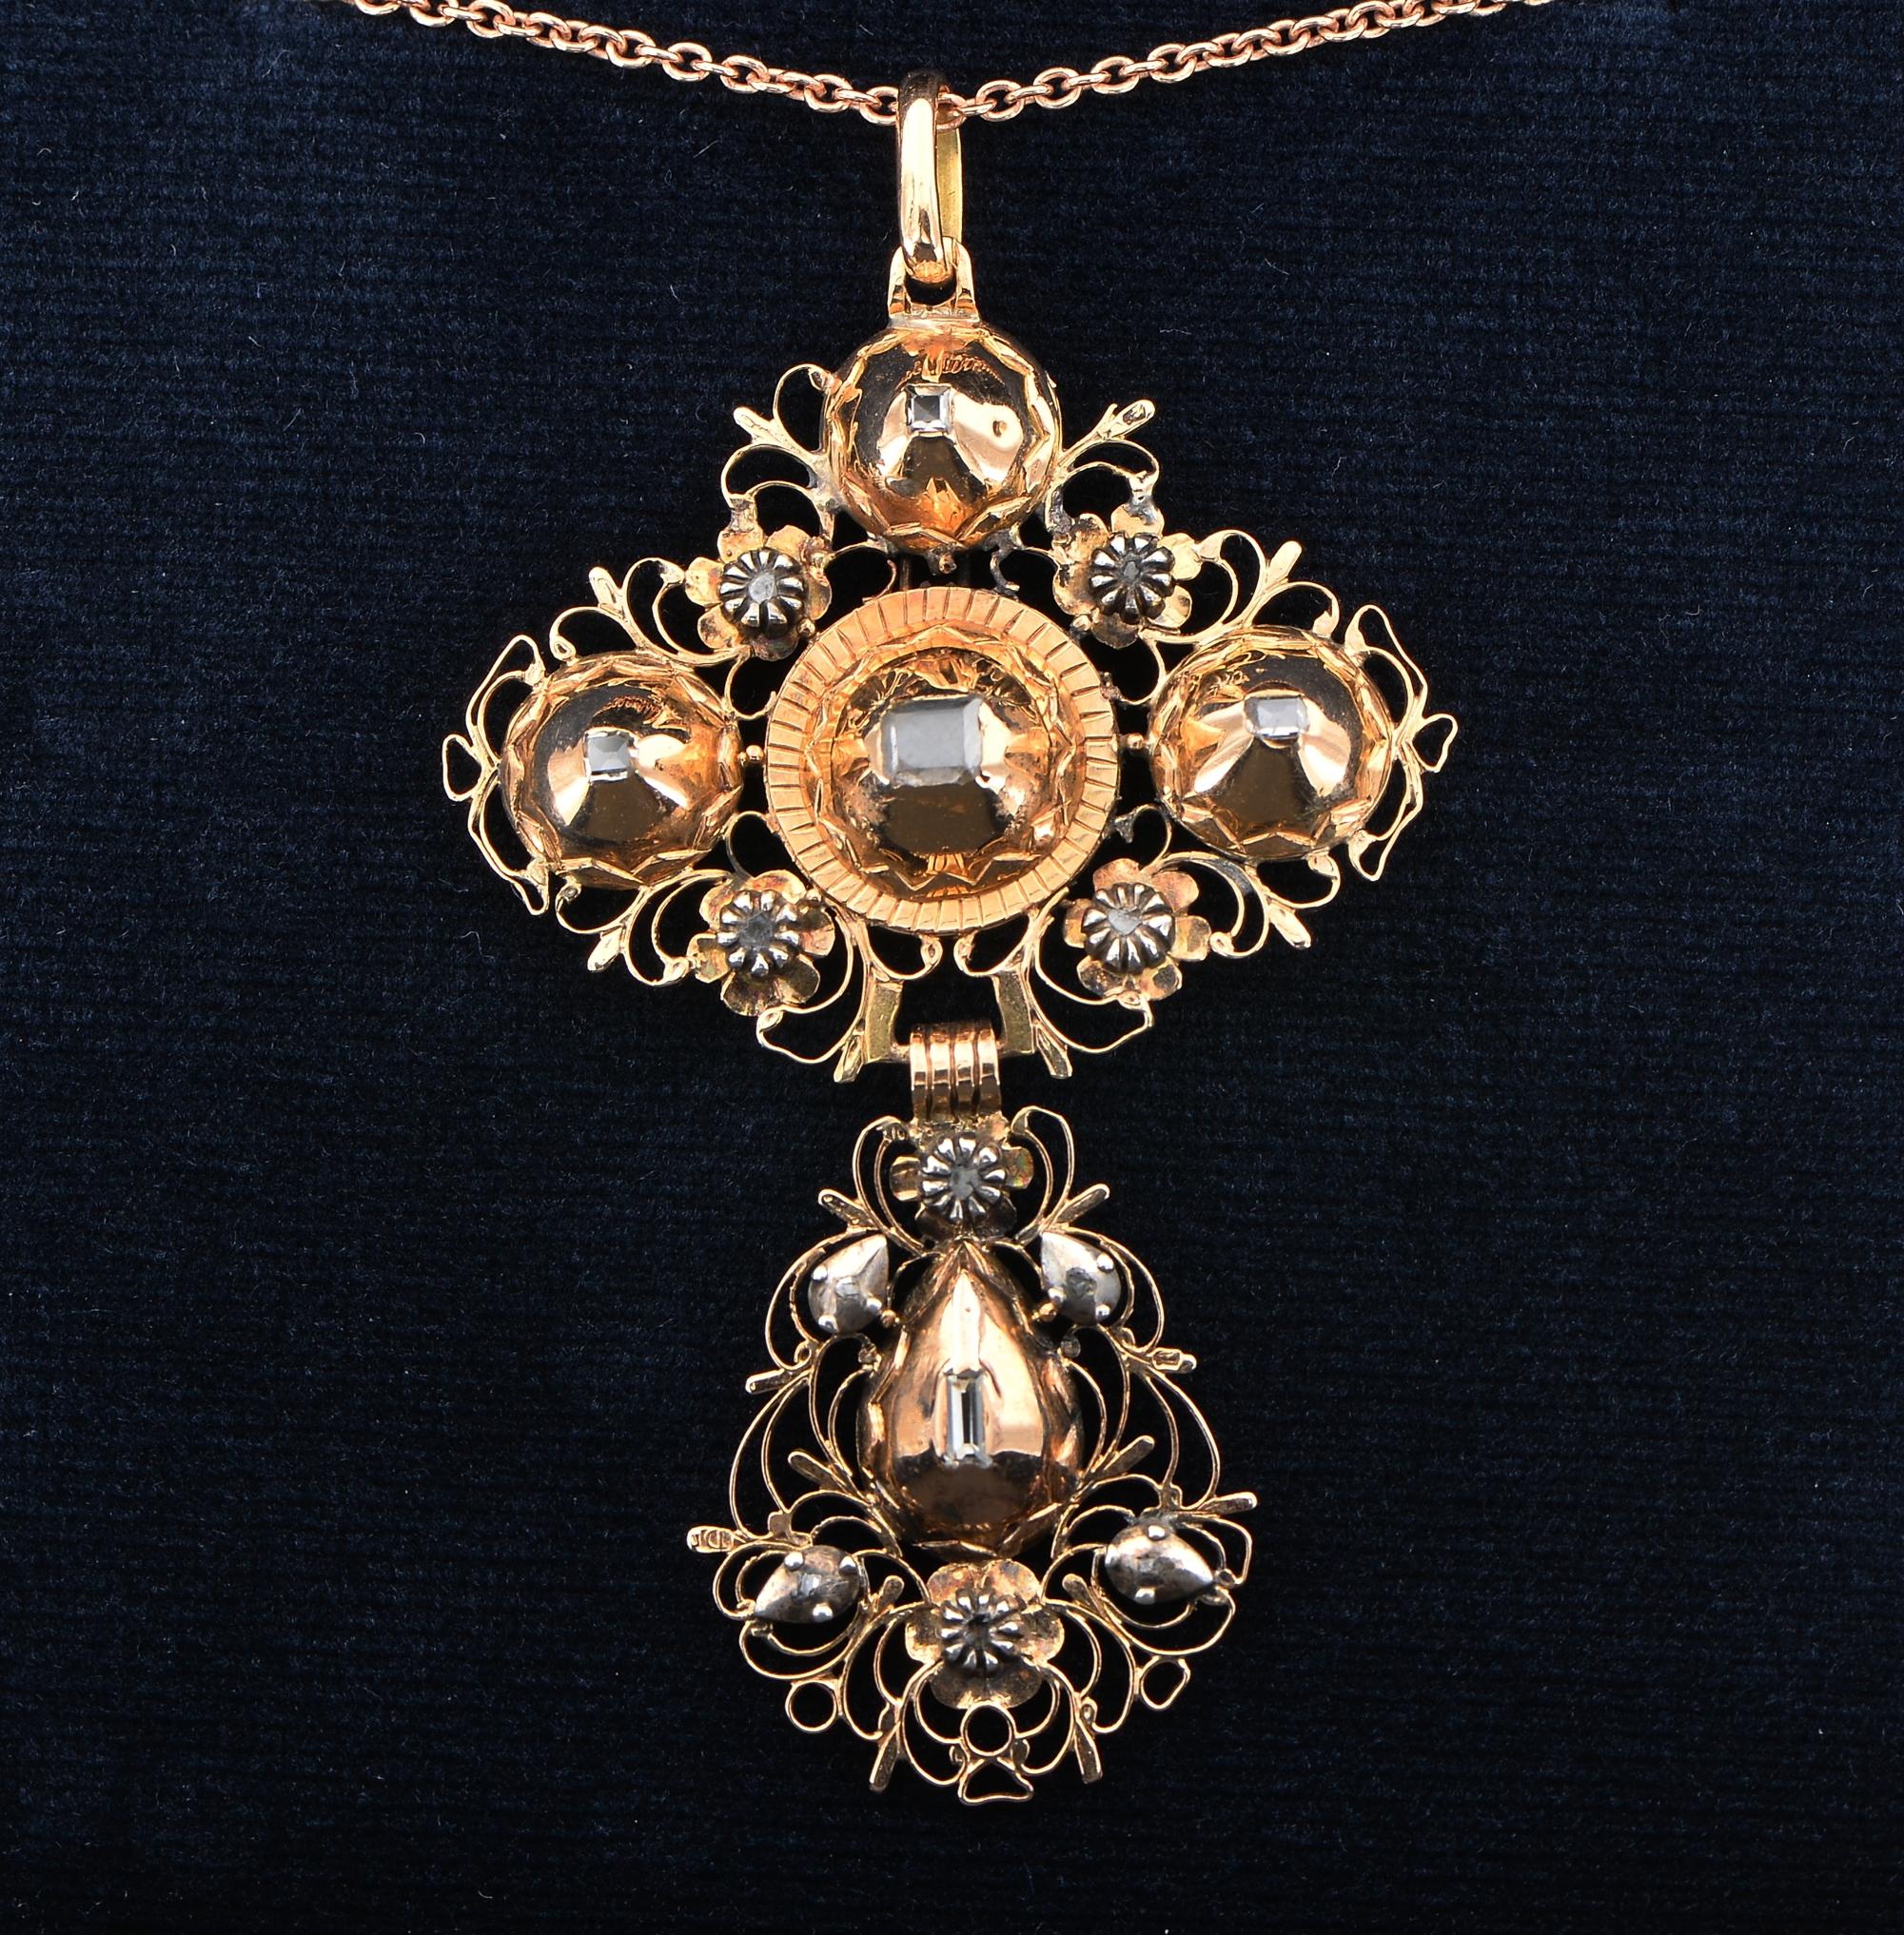 An impressive antique Georgian period European Sacred Cross, possibly Dutch origin
Georgian period – 1820 ca – traditional Flemish cross in elaborate filigree work typical of the Georgian era, extremely well made of solid 18 Kt gold tiny floret